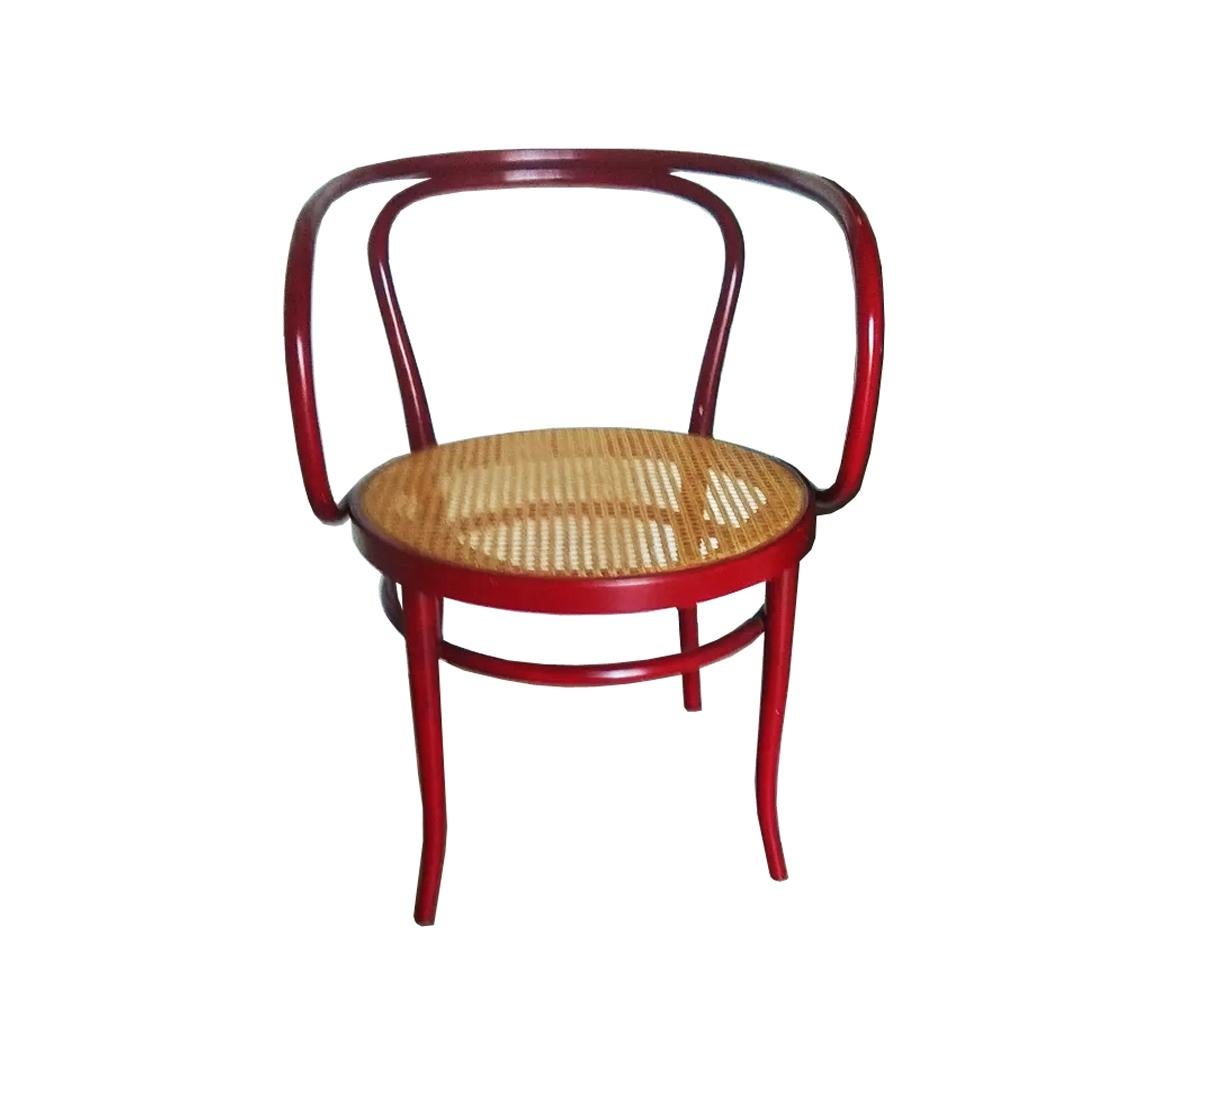 Pair of chairs after Thonet, from the years between 1955-1965.
209 Thonet chair
They are in very very good condition, they are hardly used, almost like new

This is Le Corbusier's favorite chair and one of the favorite designs of architects and